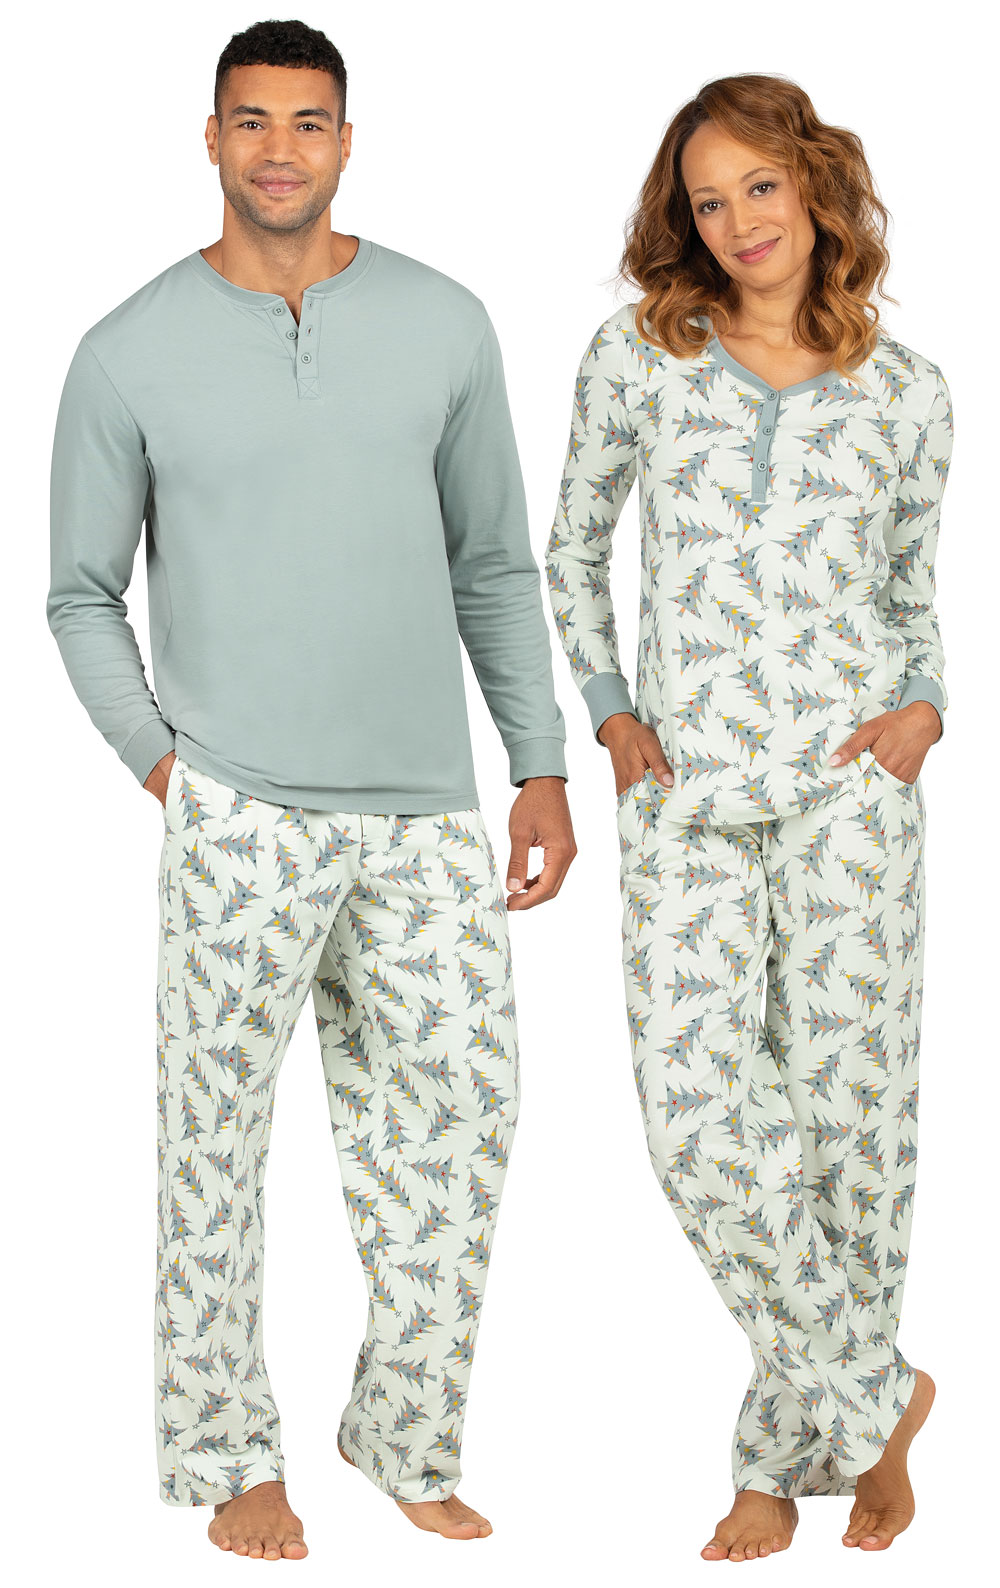 His and Her Pajamas